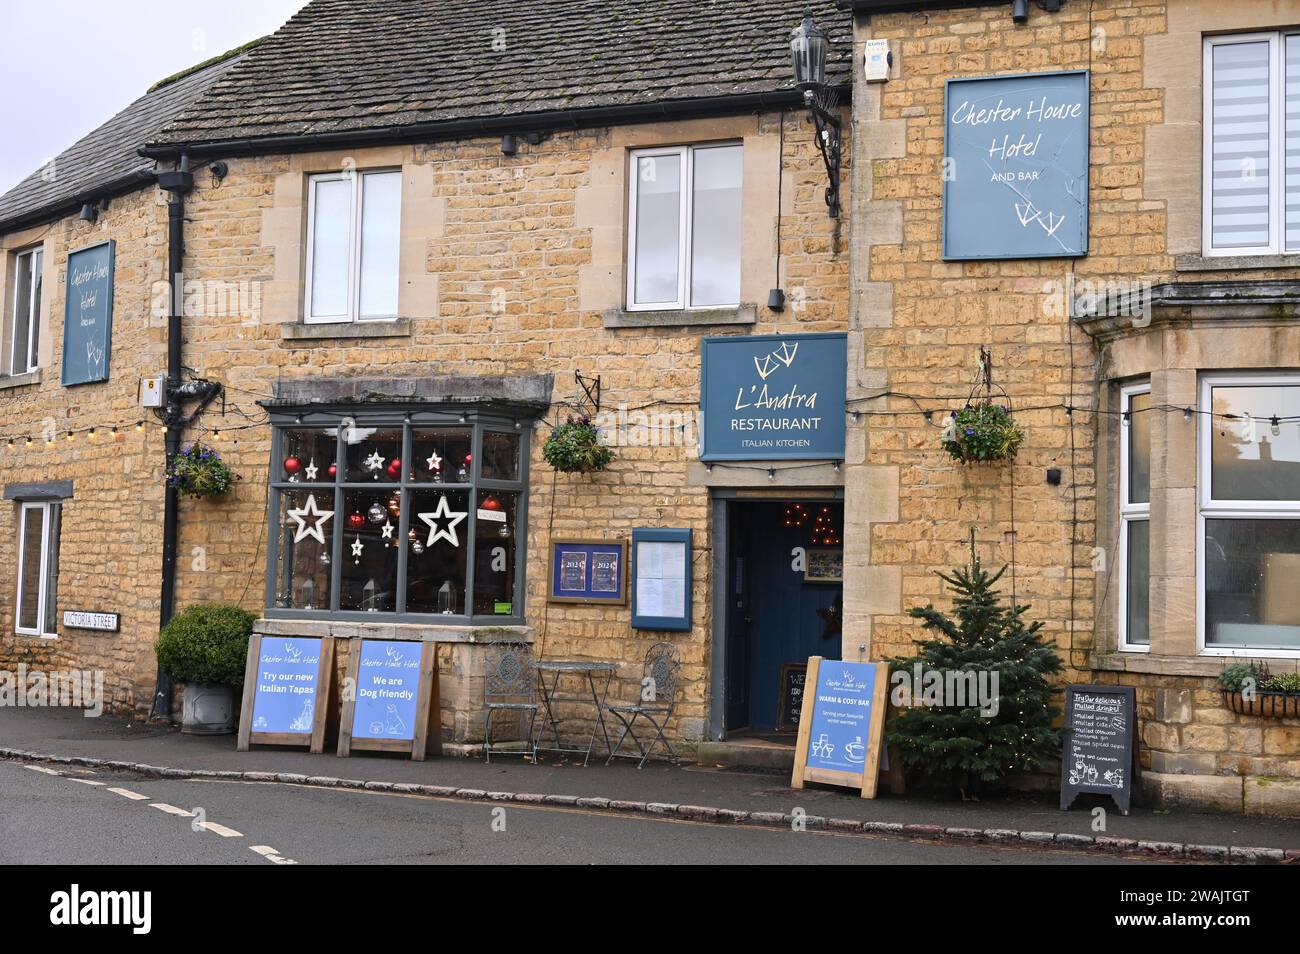 L'Anatra, an Italian restaurant in the Cotswold village of Bourton on the Water, Gloucestershire Stock Photo